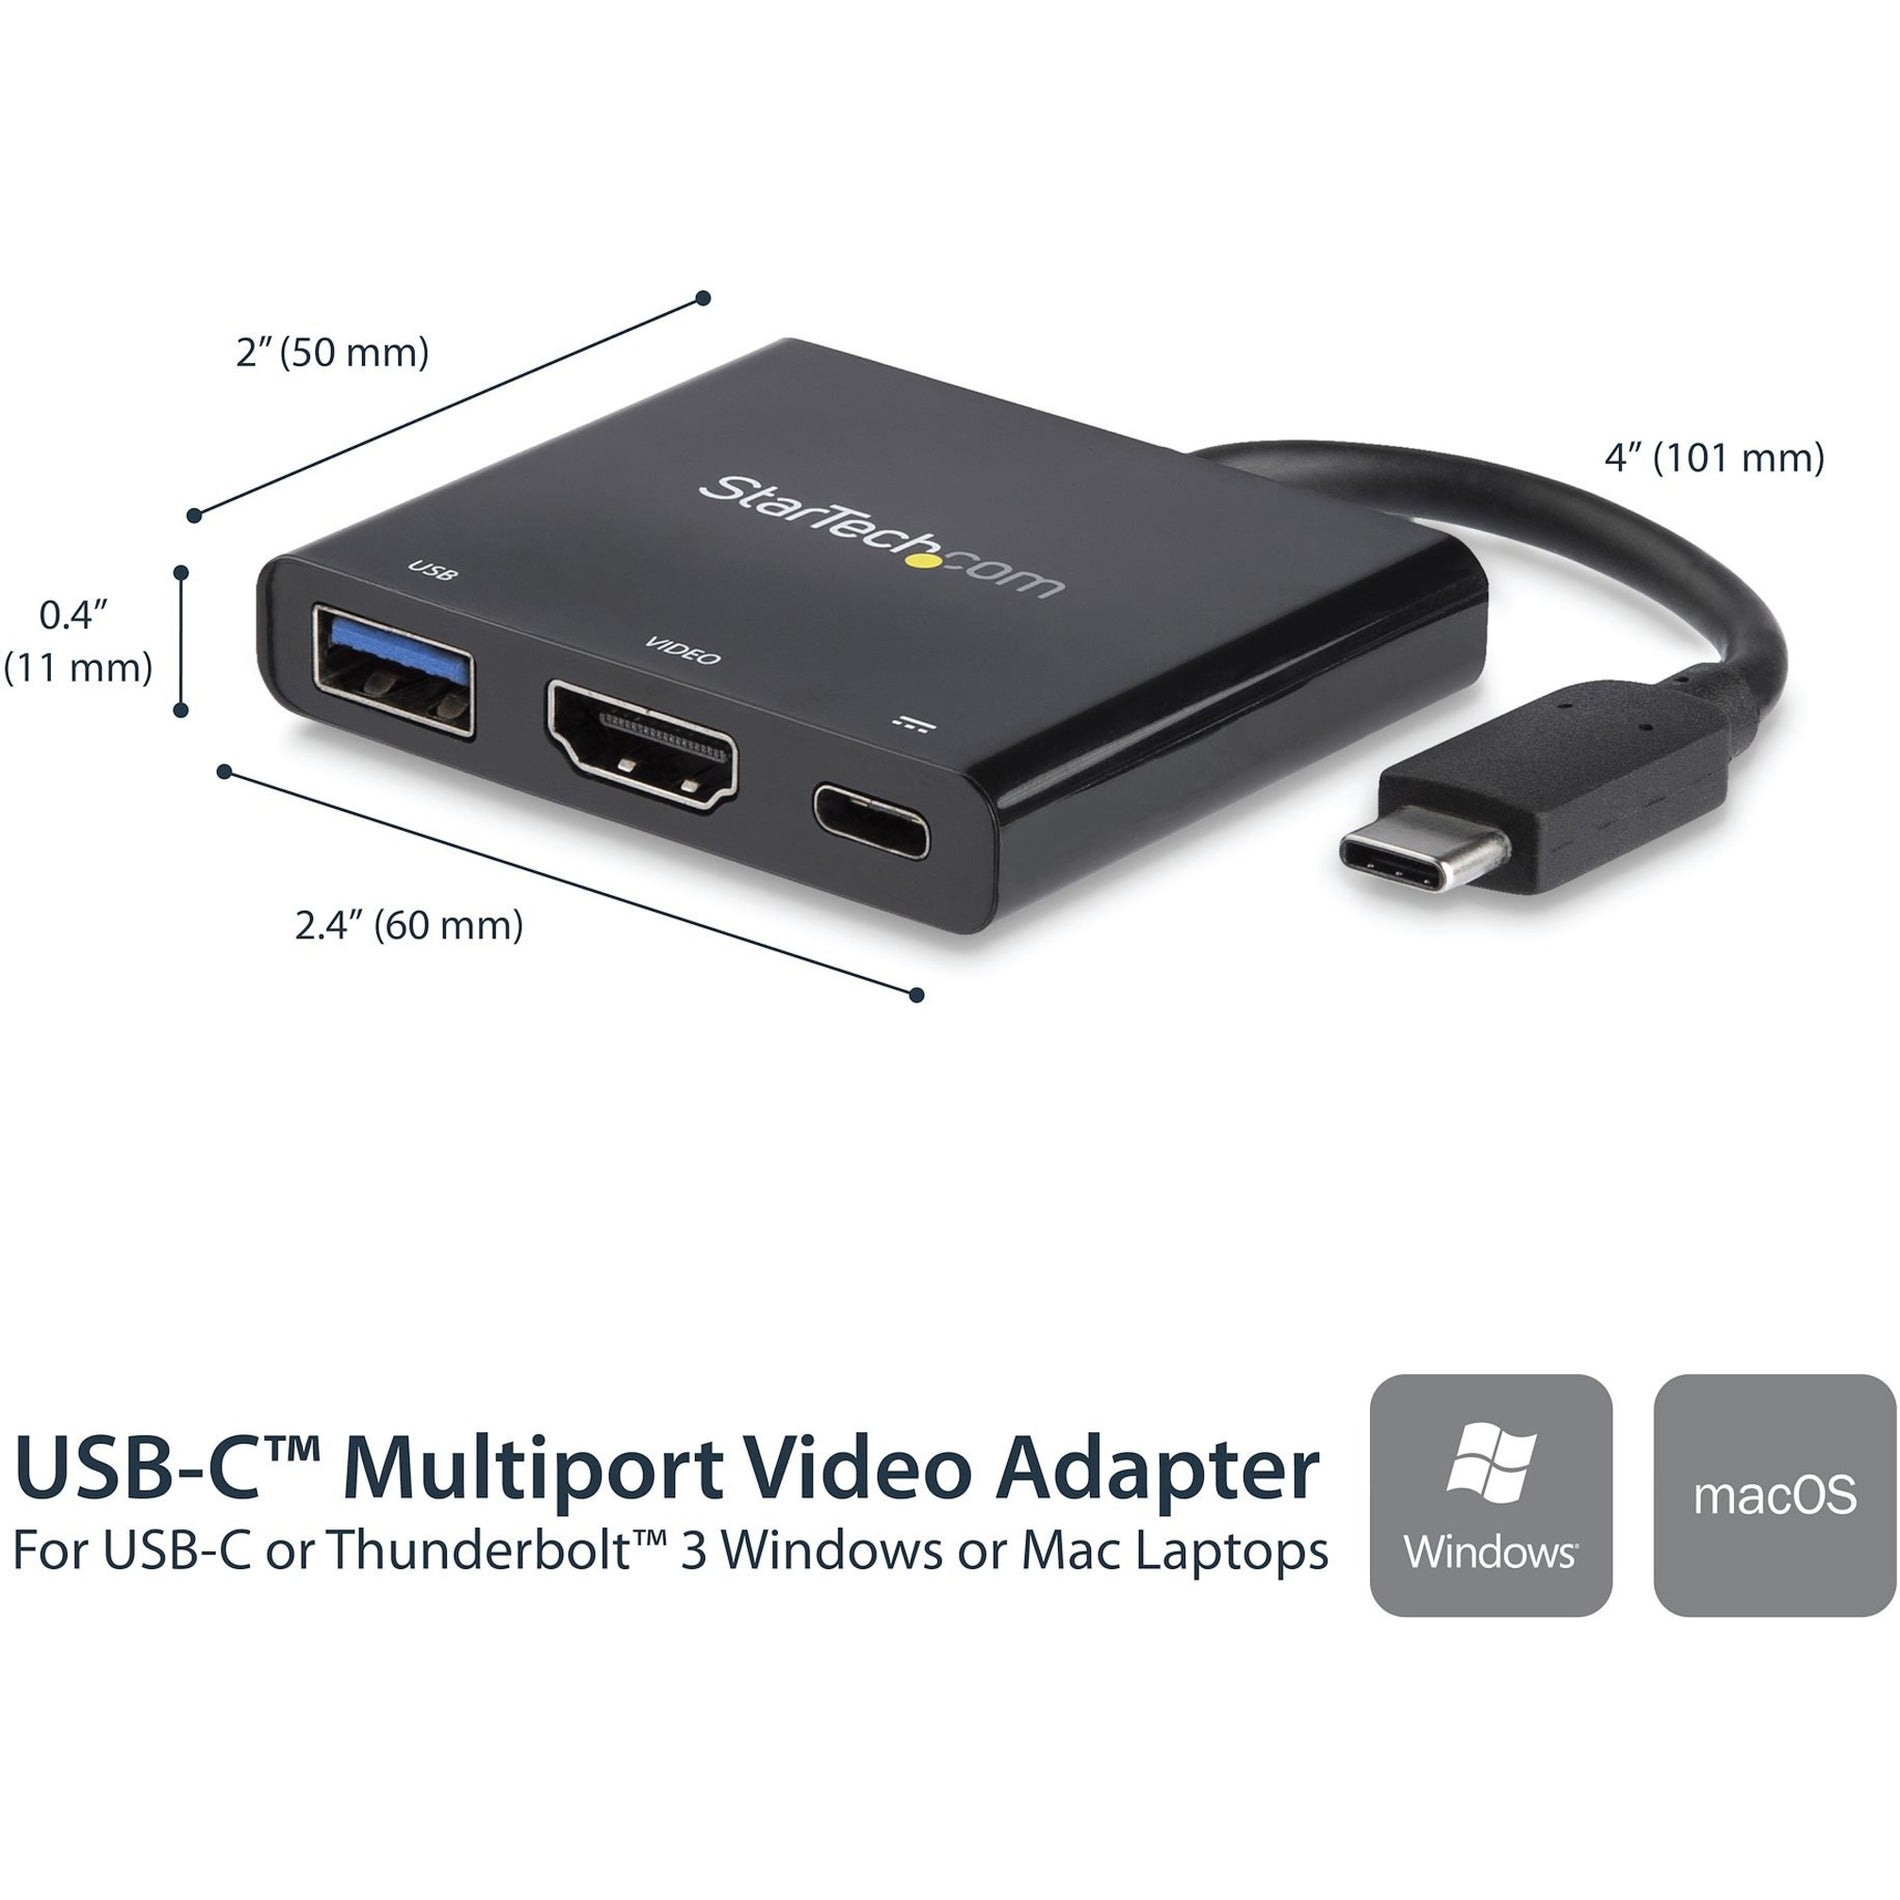 StarTech.com CDP2HDUACP USB-C to 4K HDMI Multifunction Adapter - USB Type-C to HDMI, USB-A Port, Power Delivery - USB C Laptop Travel Adapter